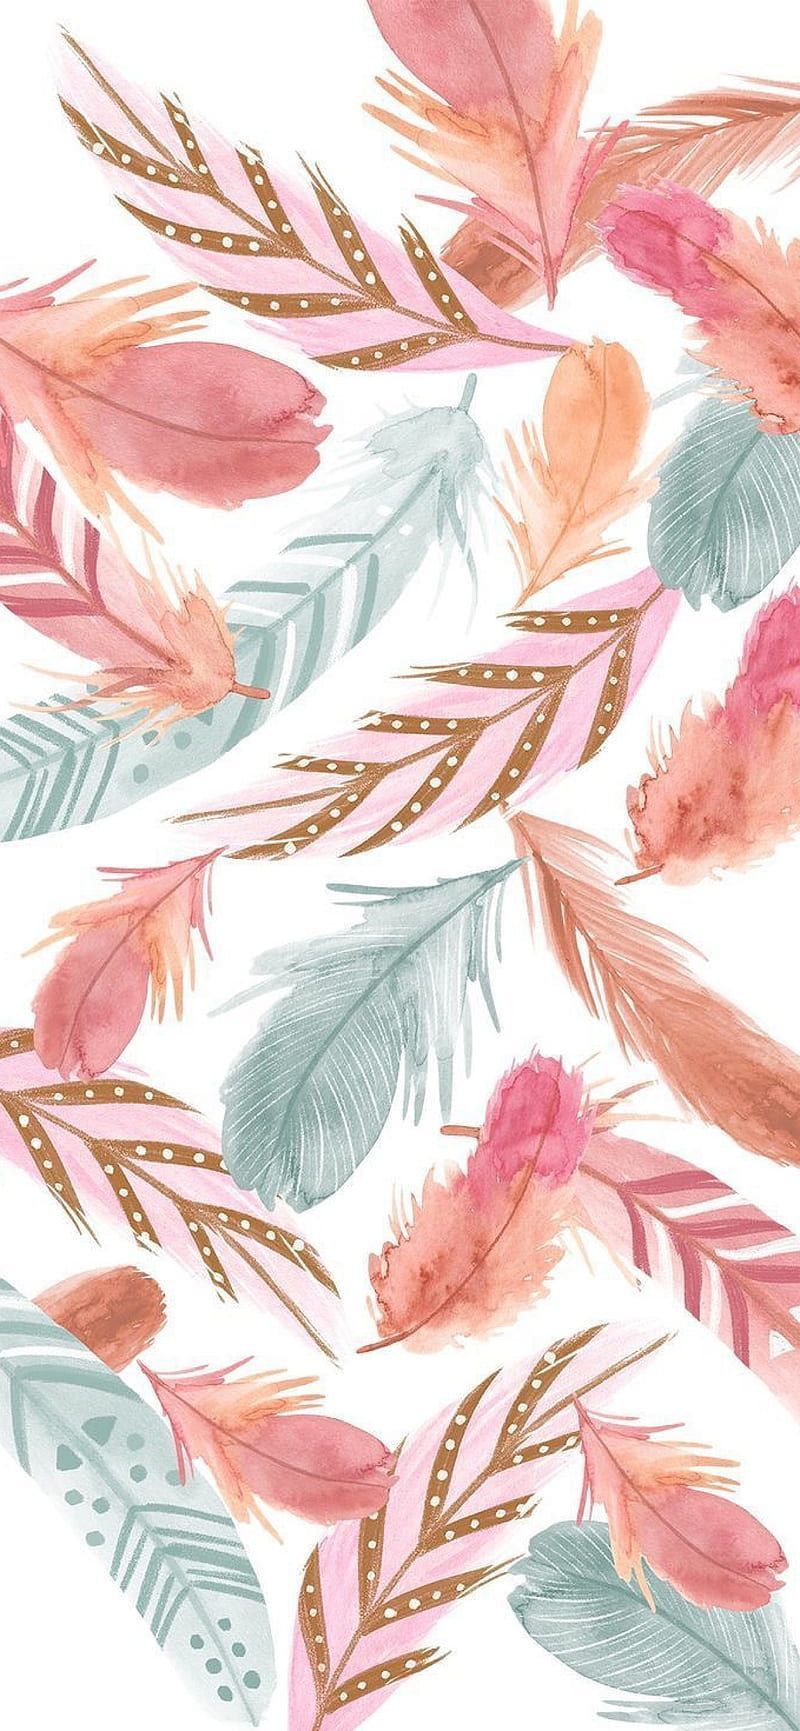 A colorful wallpaper with pink, blue, and brown feathers - Feathers